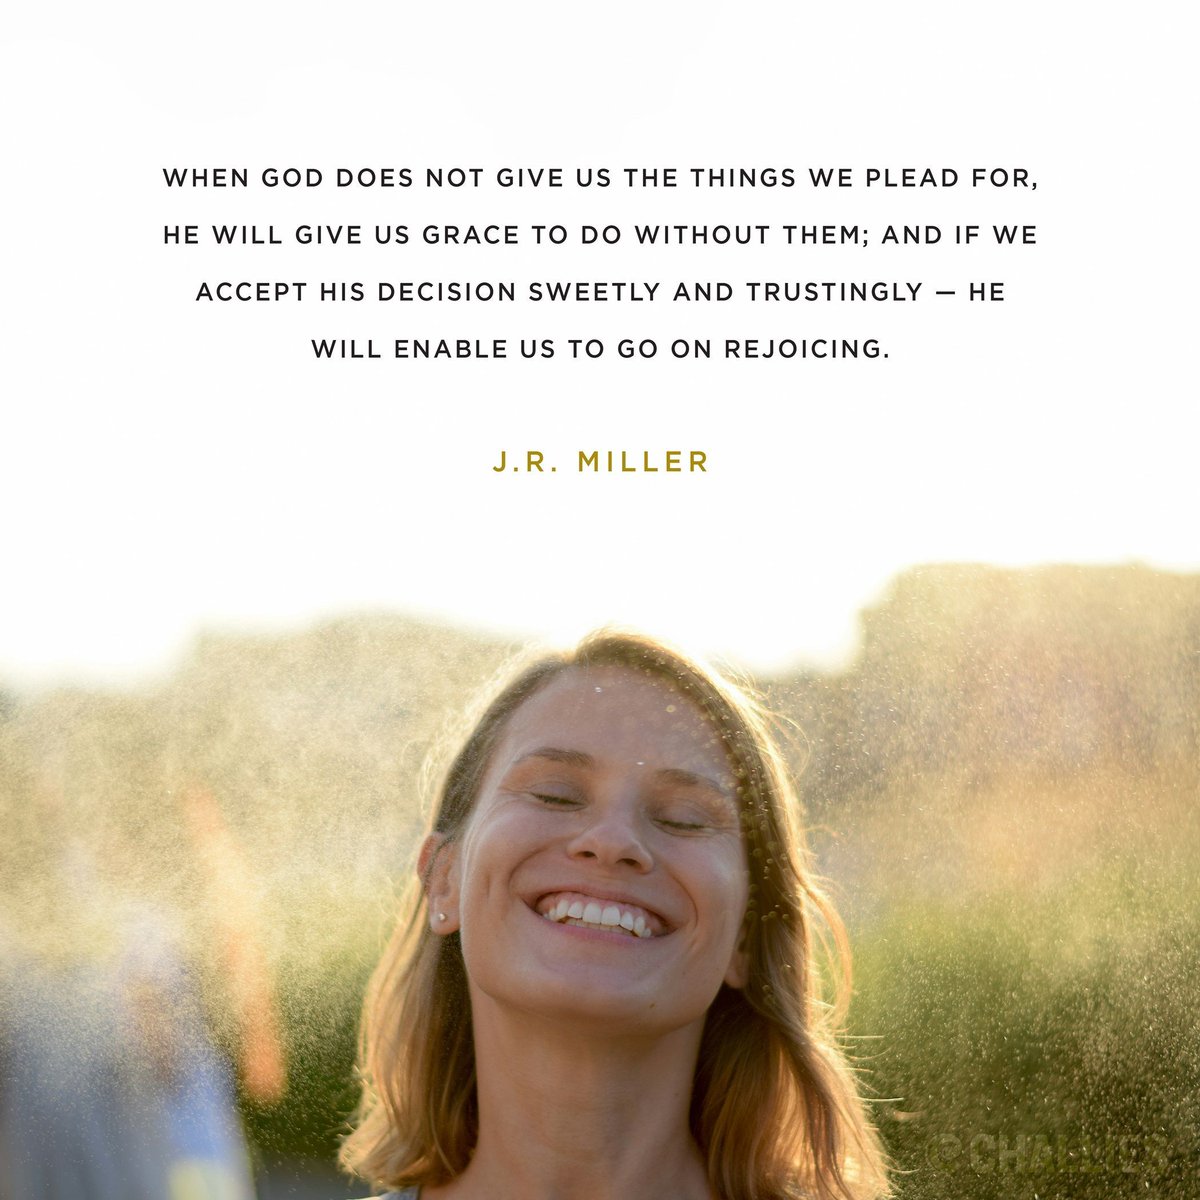 'When God does not give us the things we plead for, he will give us grace to do without them; and if we accept his decision sweetly and trustingly — he will enable us to go on rejoicing.' (J.R. Miller)